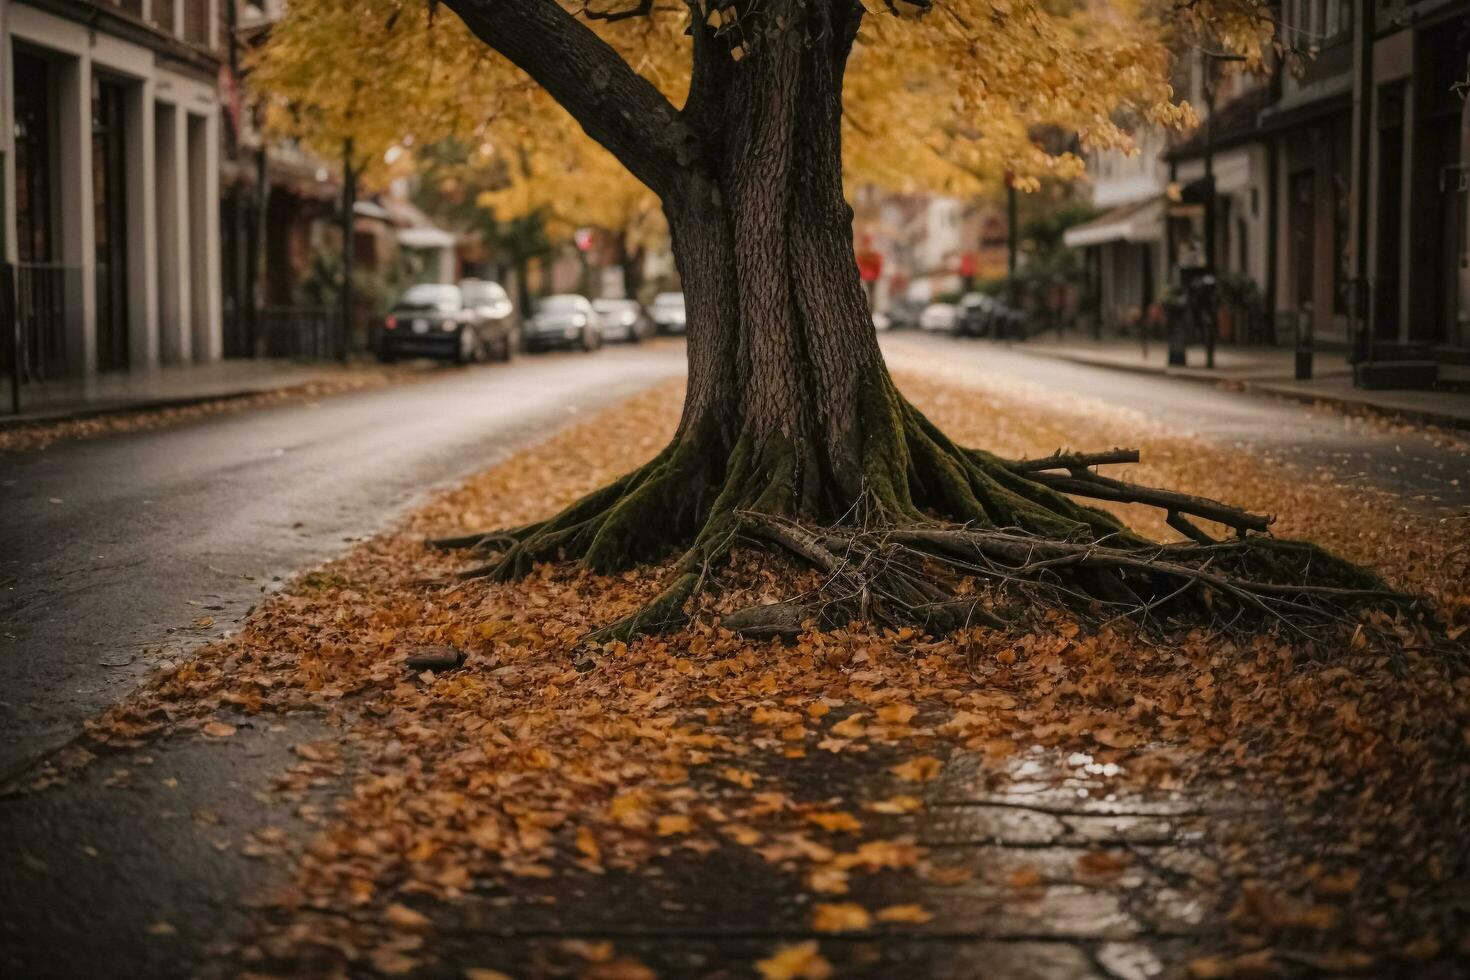 Old Tree With Broken Branches In Autumn On A Street With Some Water On The Ground photo